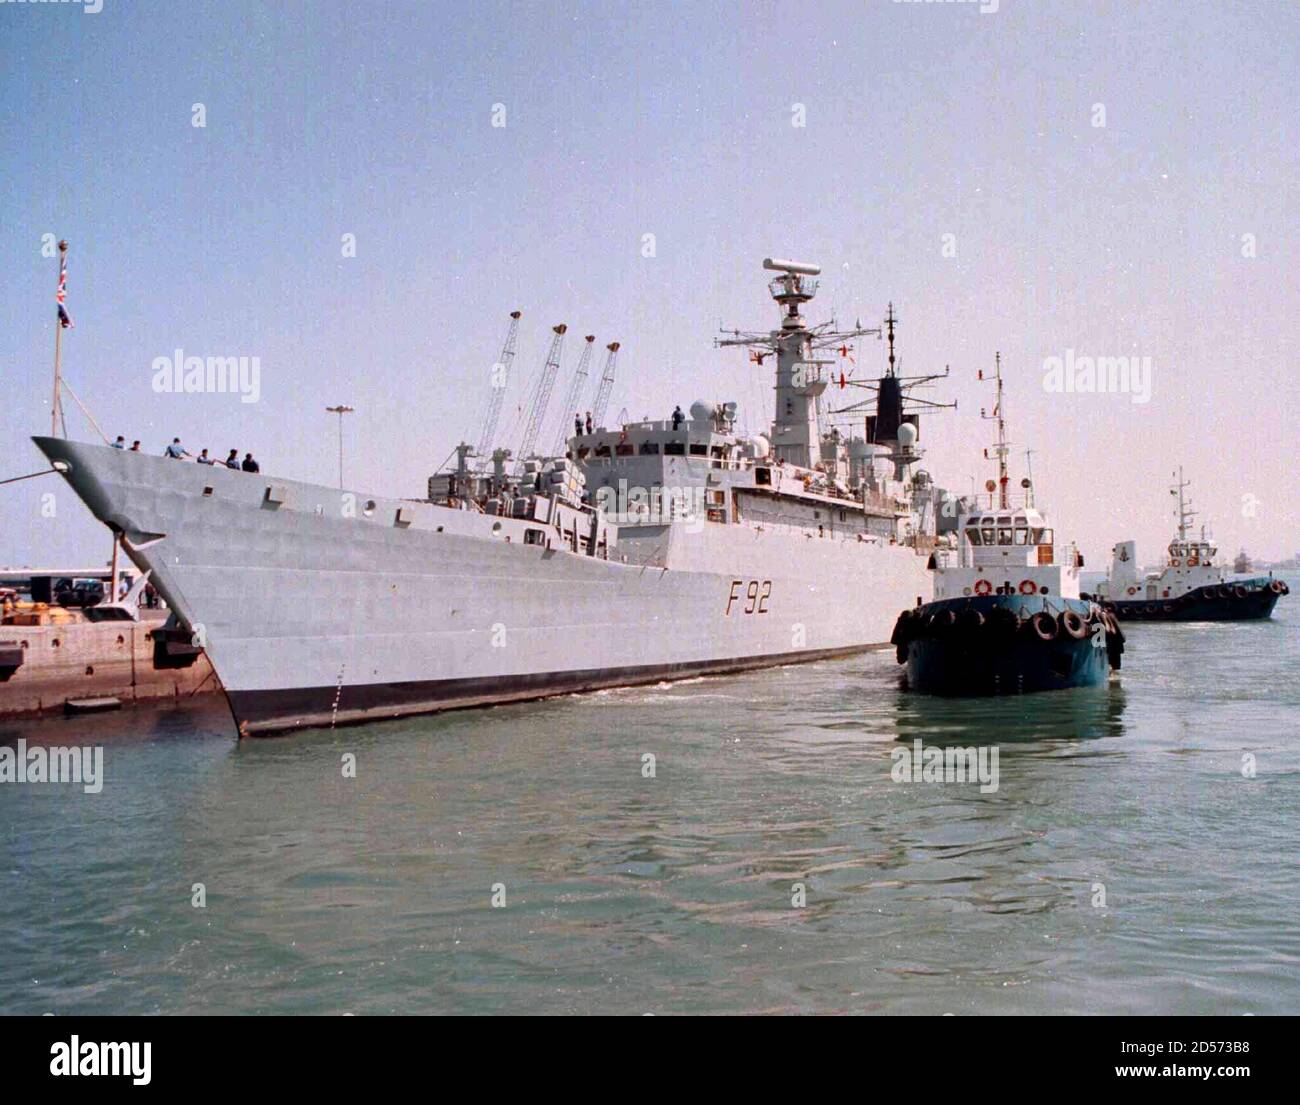 Duties Hms High Resolution Stock Photography and Images - Alamy